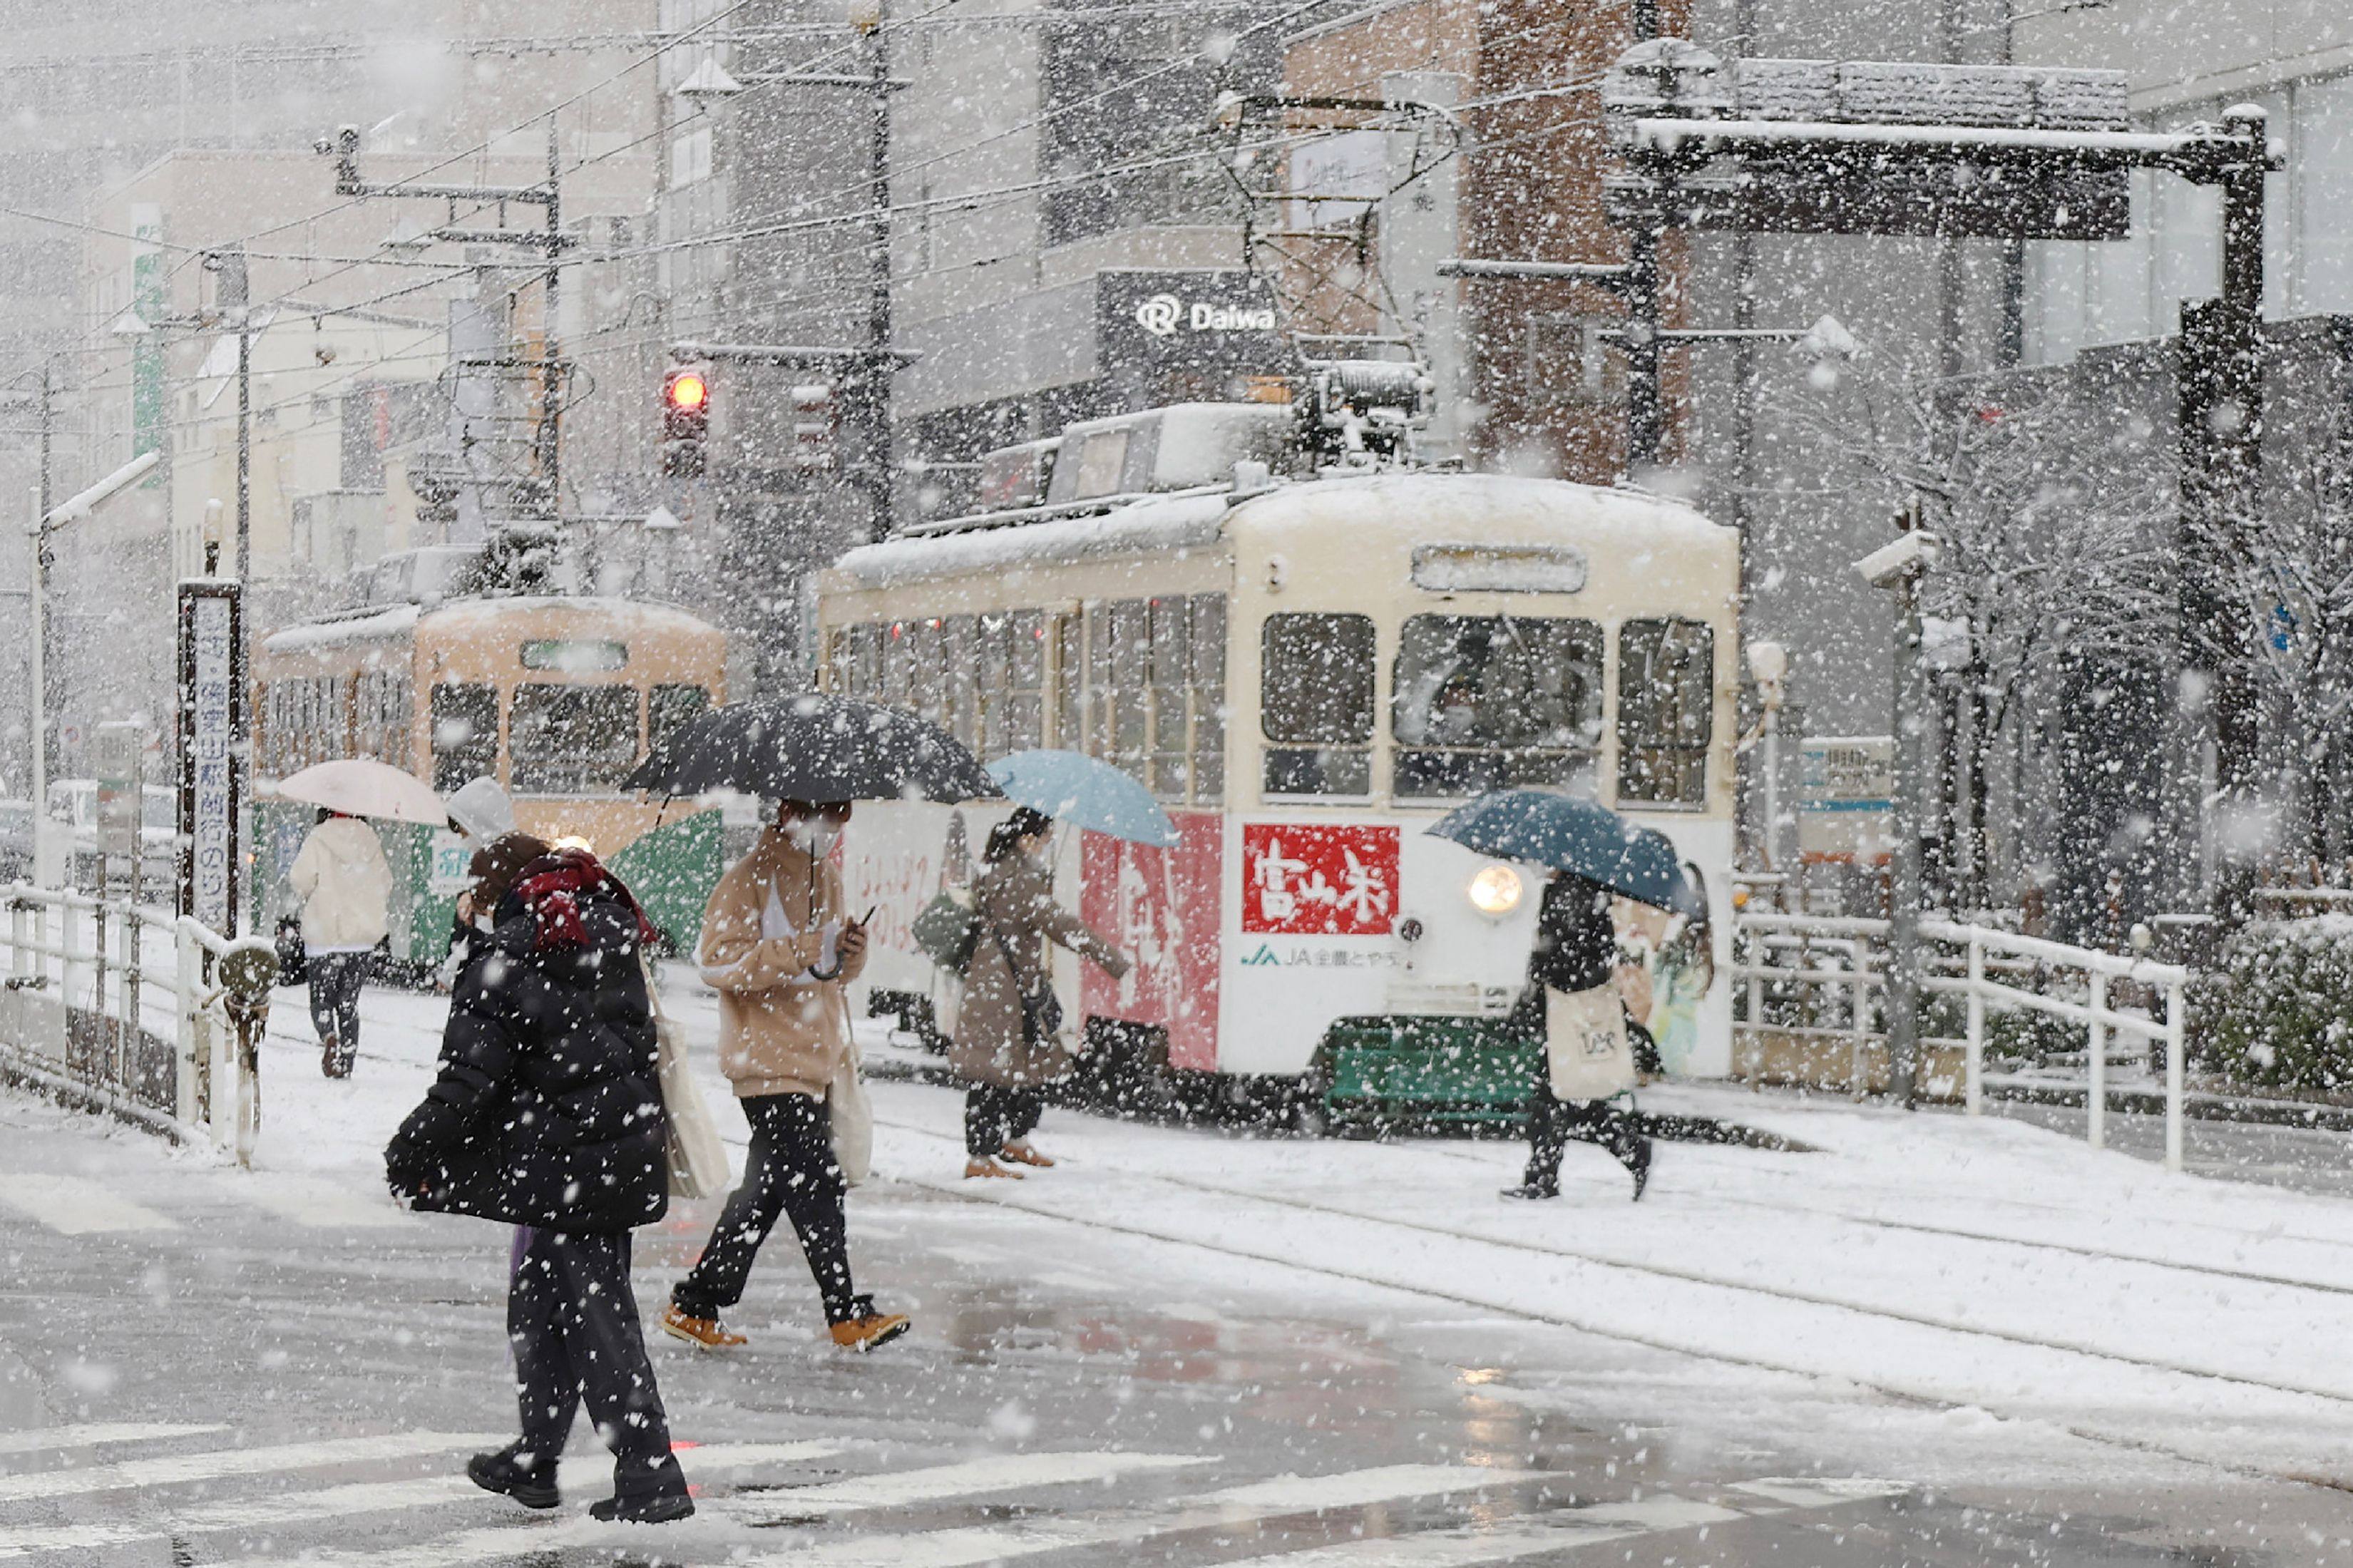 'Once-in-a-decade' blizzard freezes holiday plans for Hongkongers in Japan